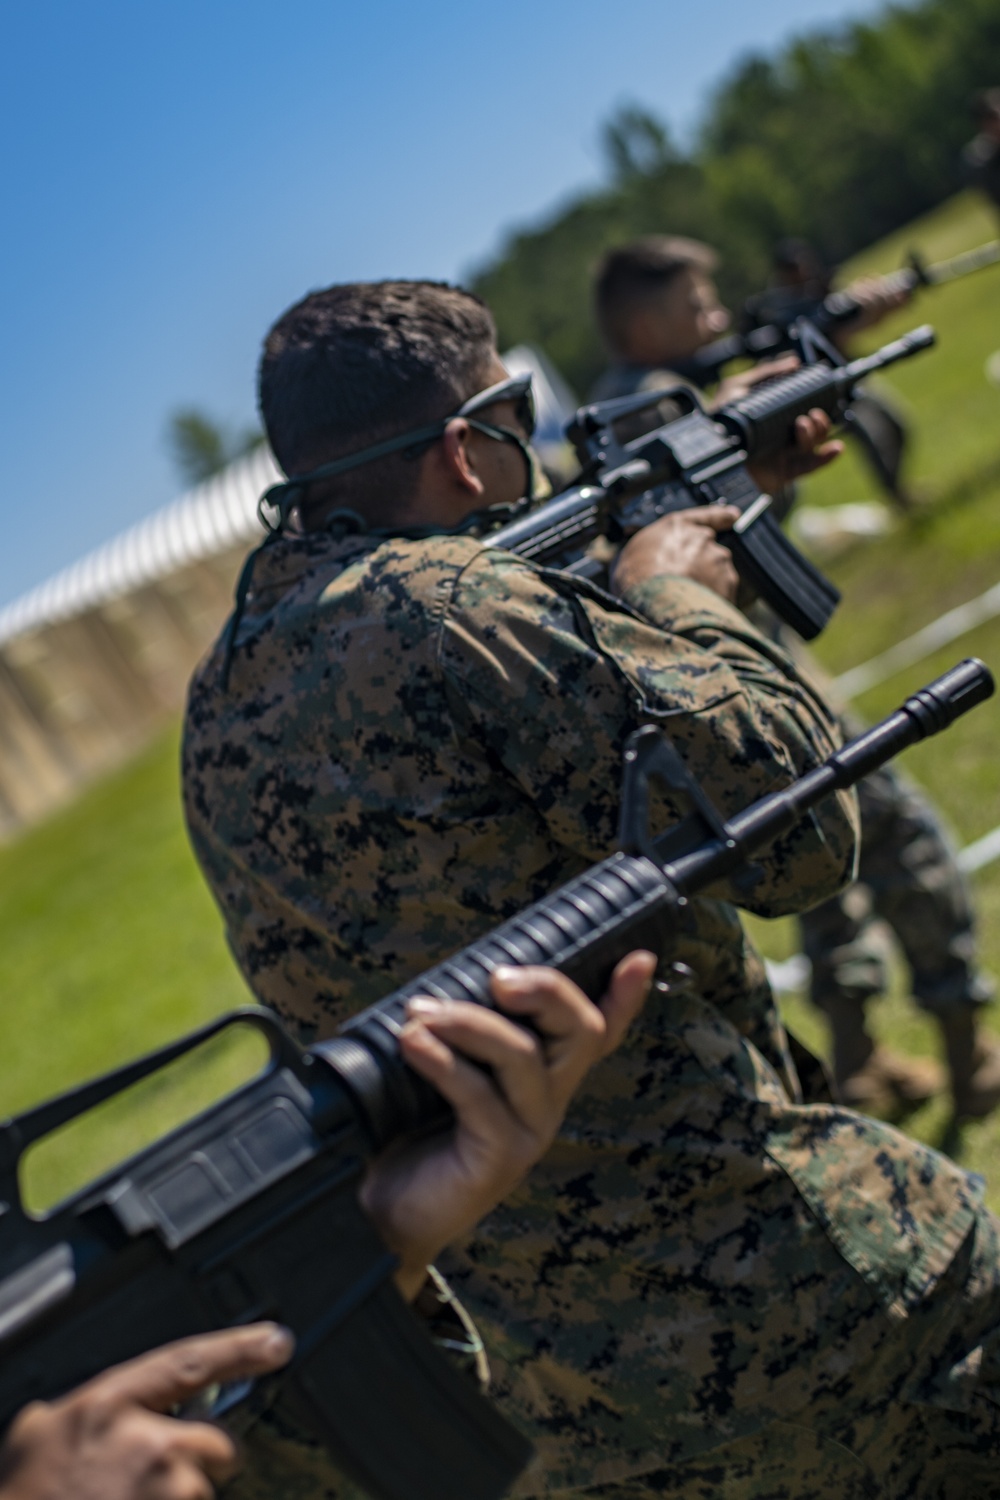 Task force Marines participate in military operations on urban terrain training during exercise at Camp Lejeune